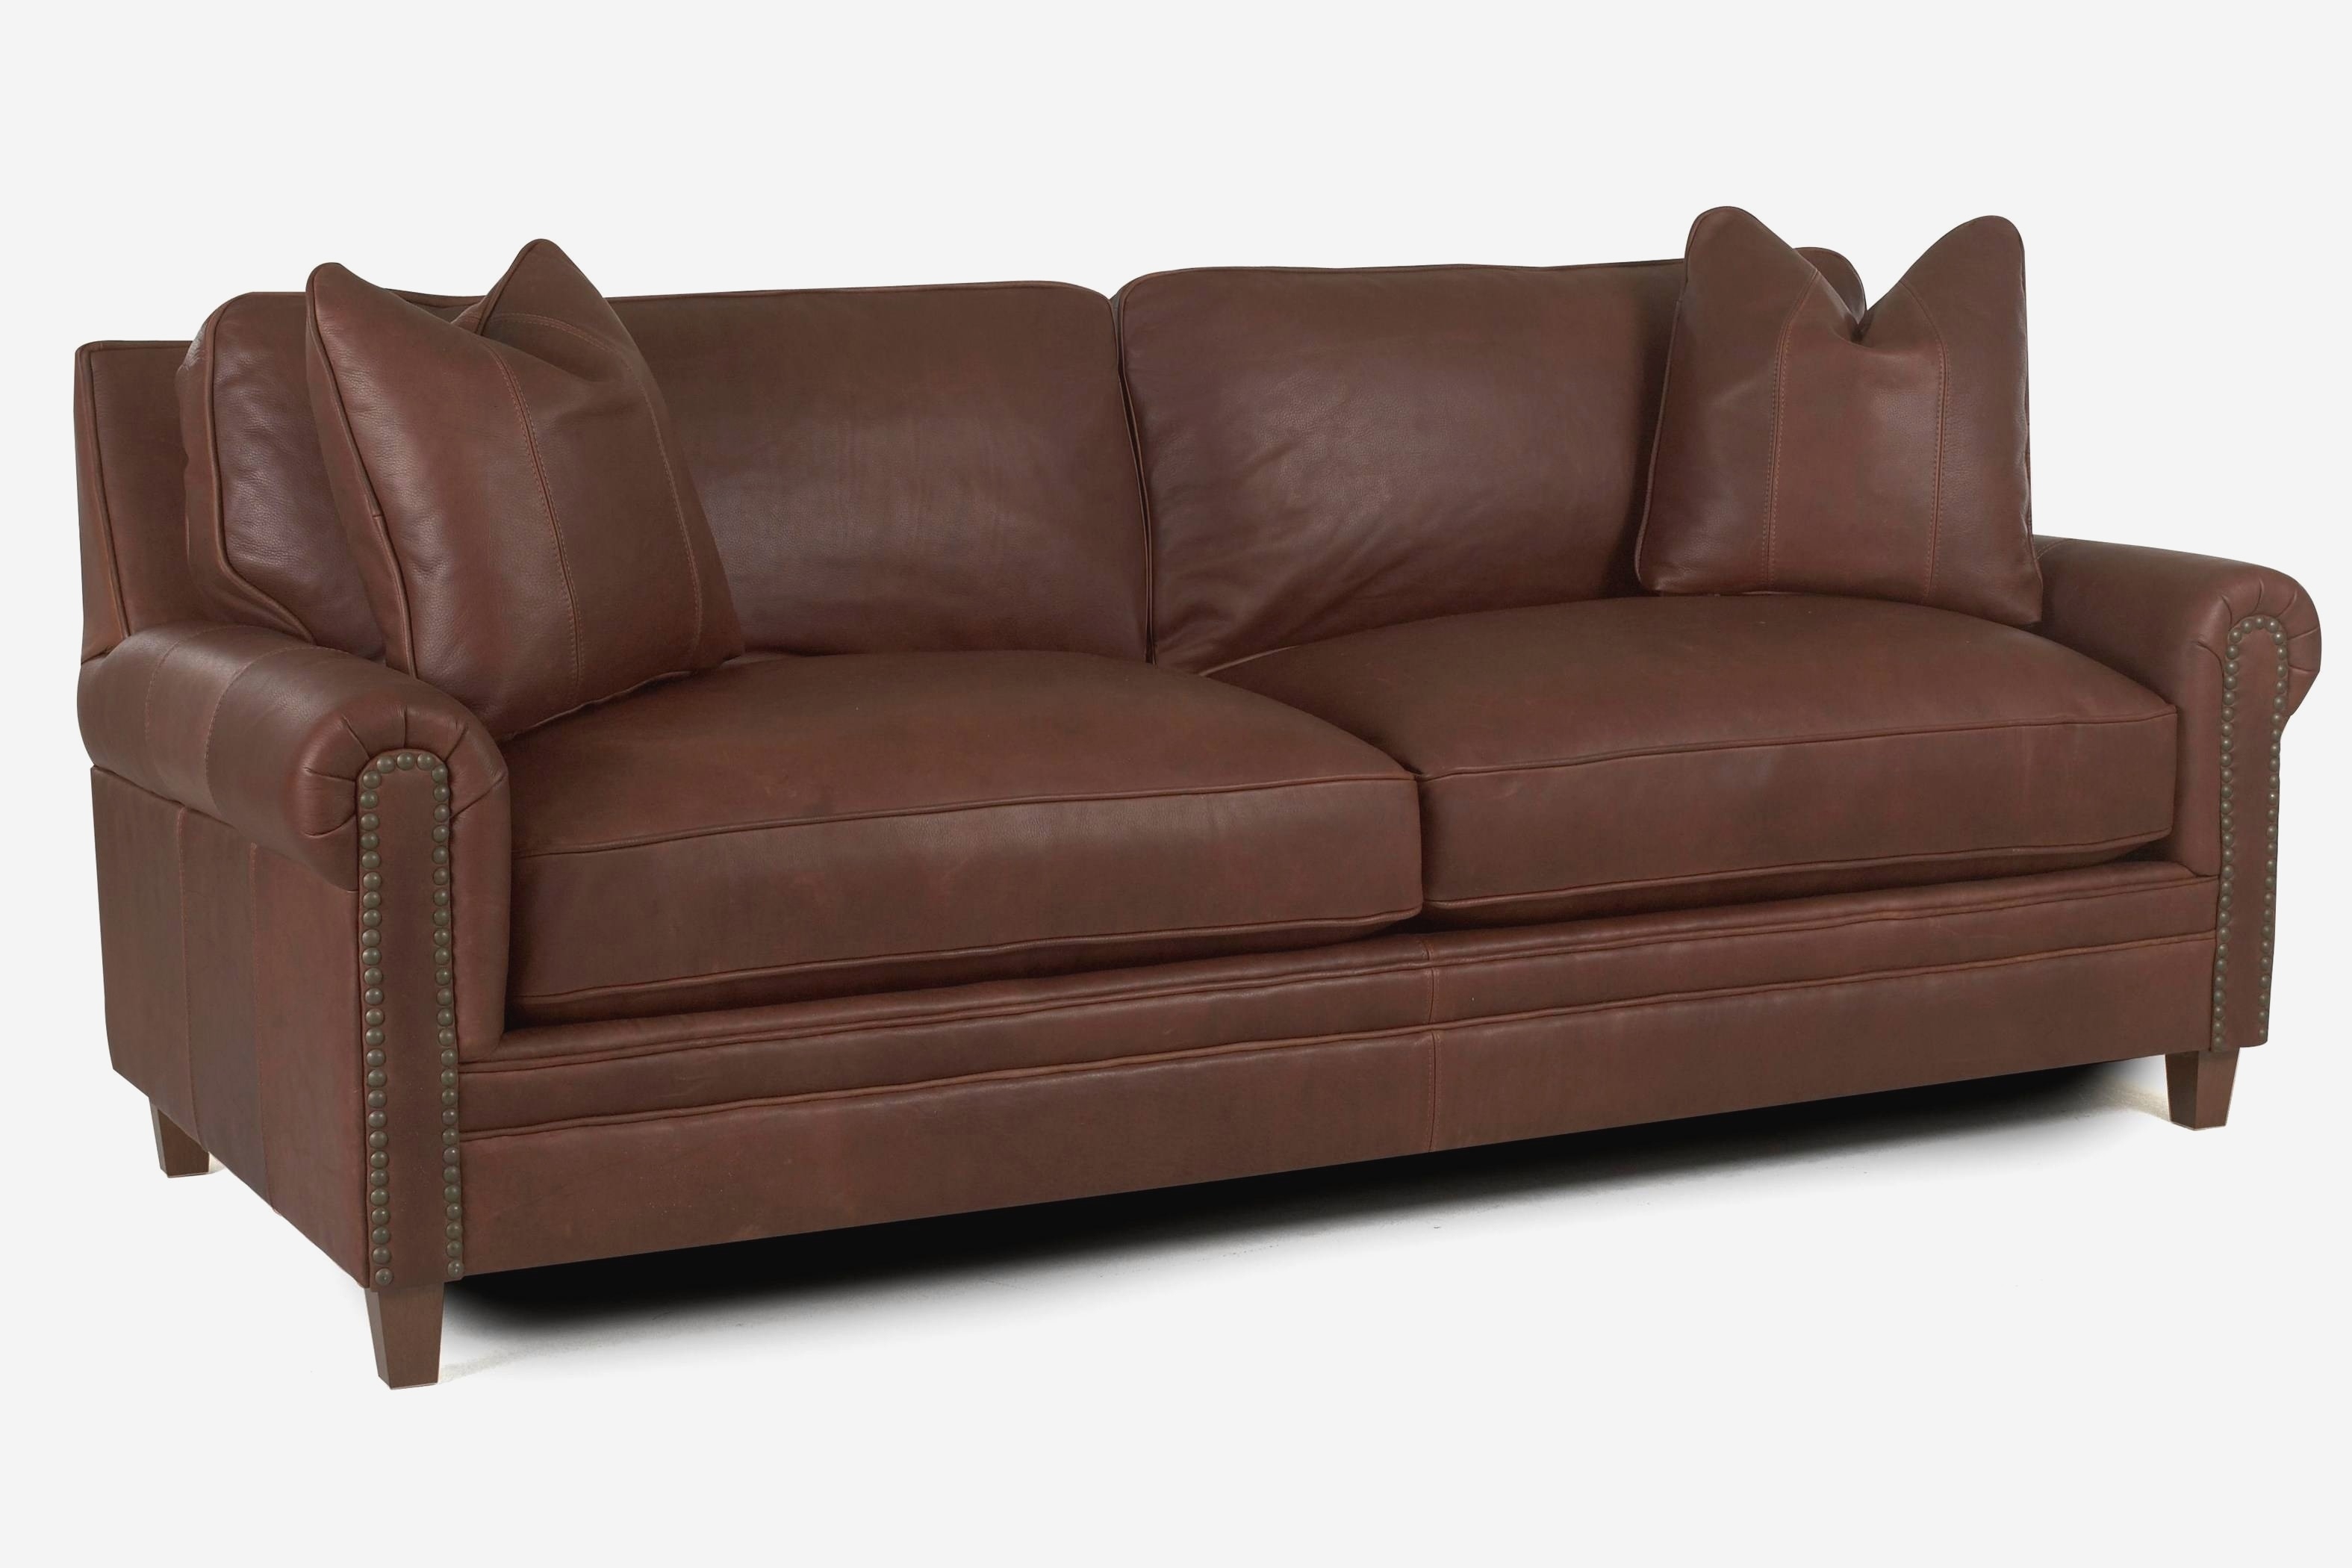 sears outlet sofa beds